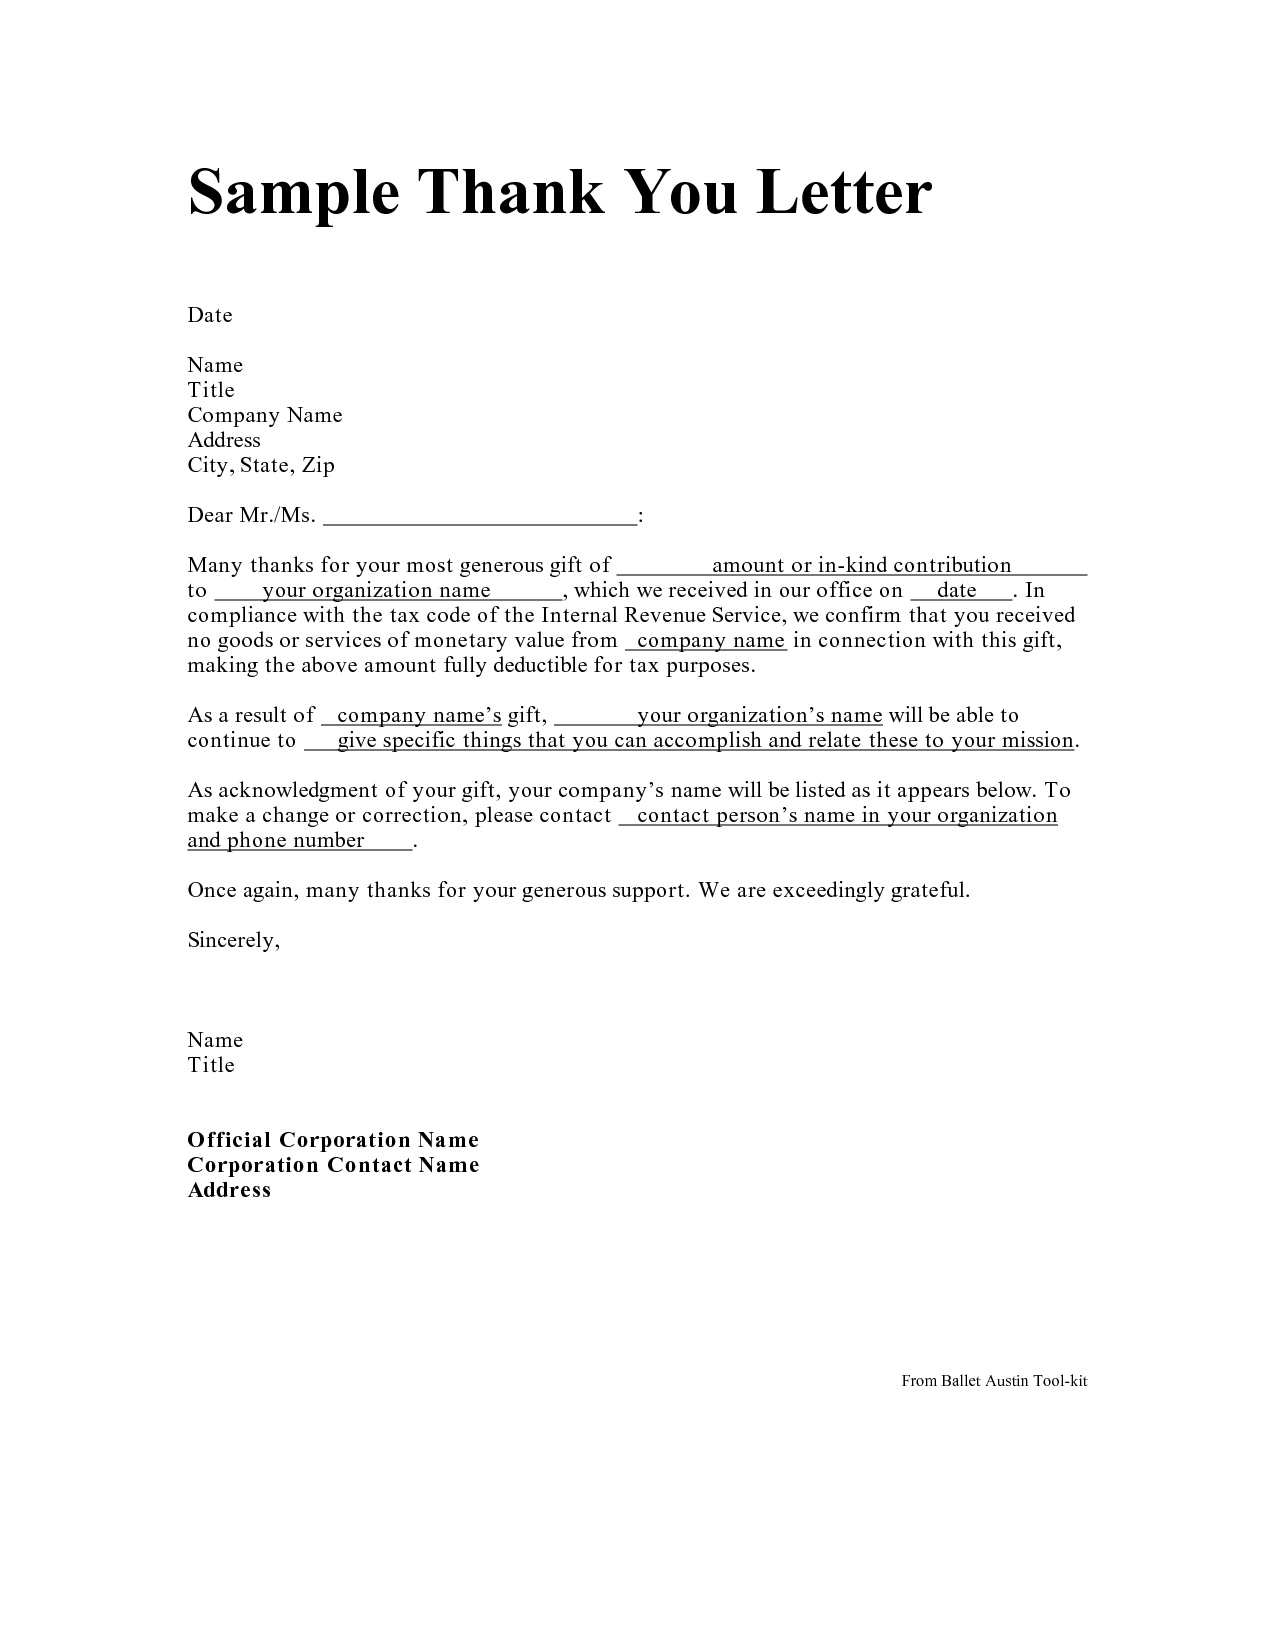 Change Of Address Letter Template - Personal Thank You Letter Personal Thank You Letter Samples